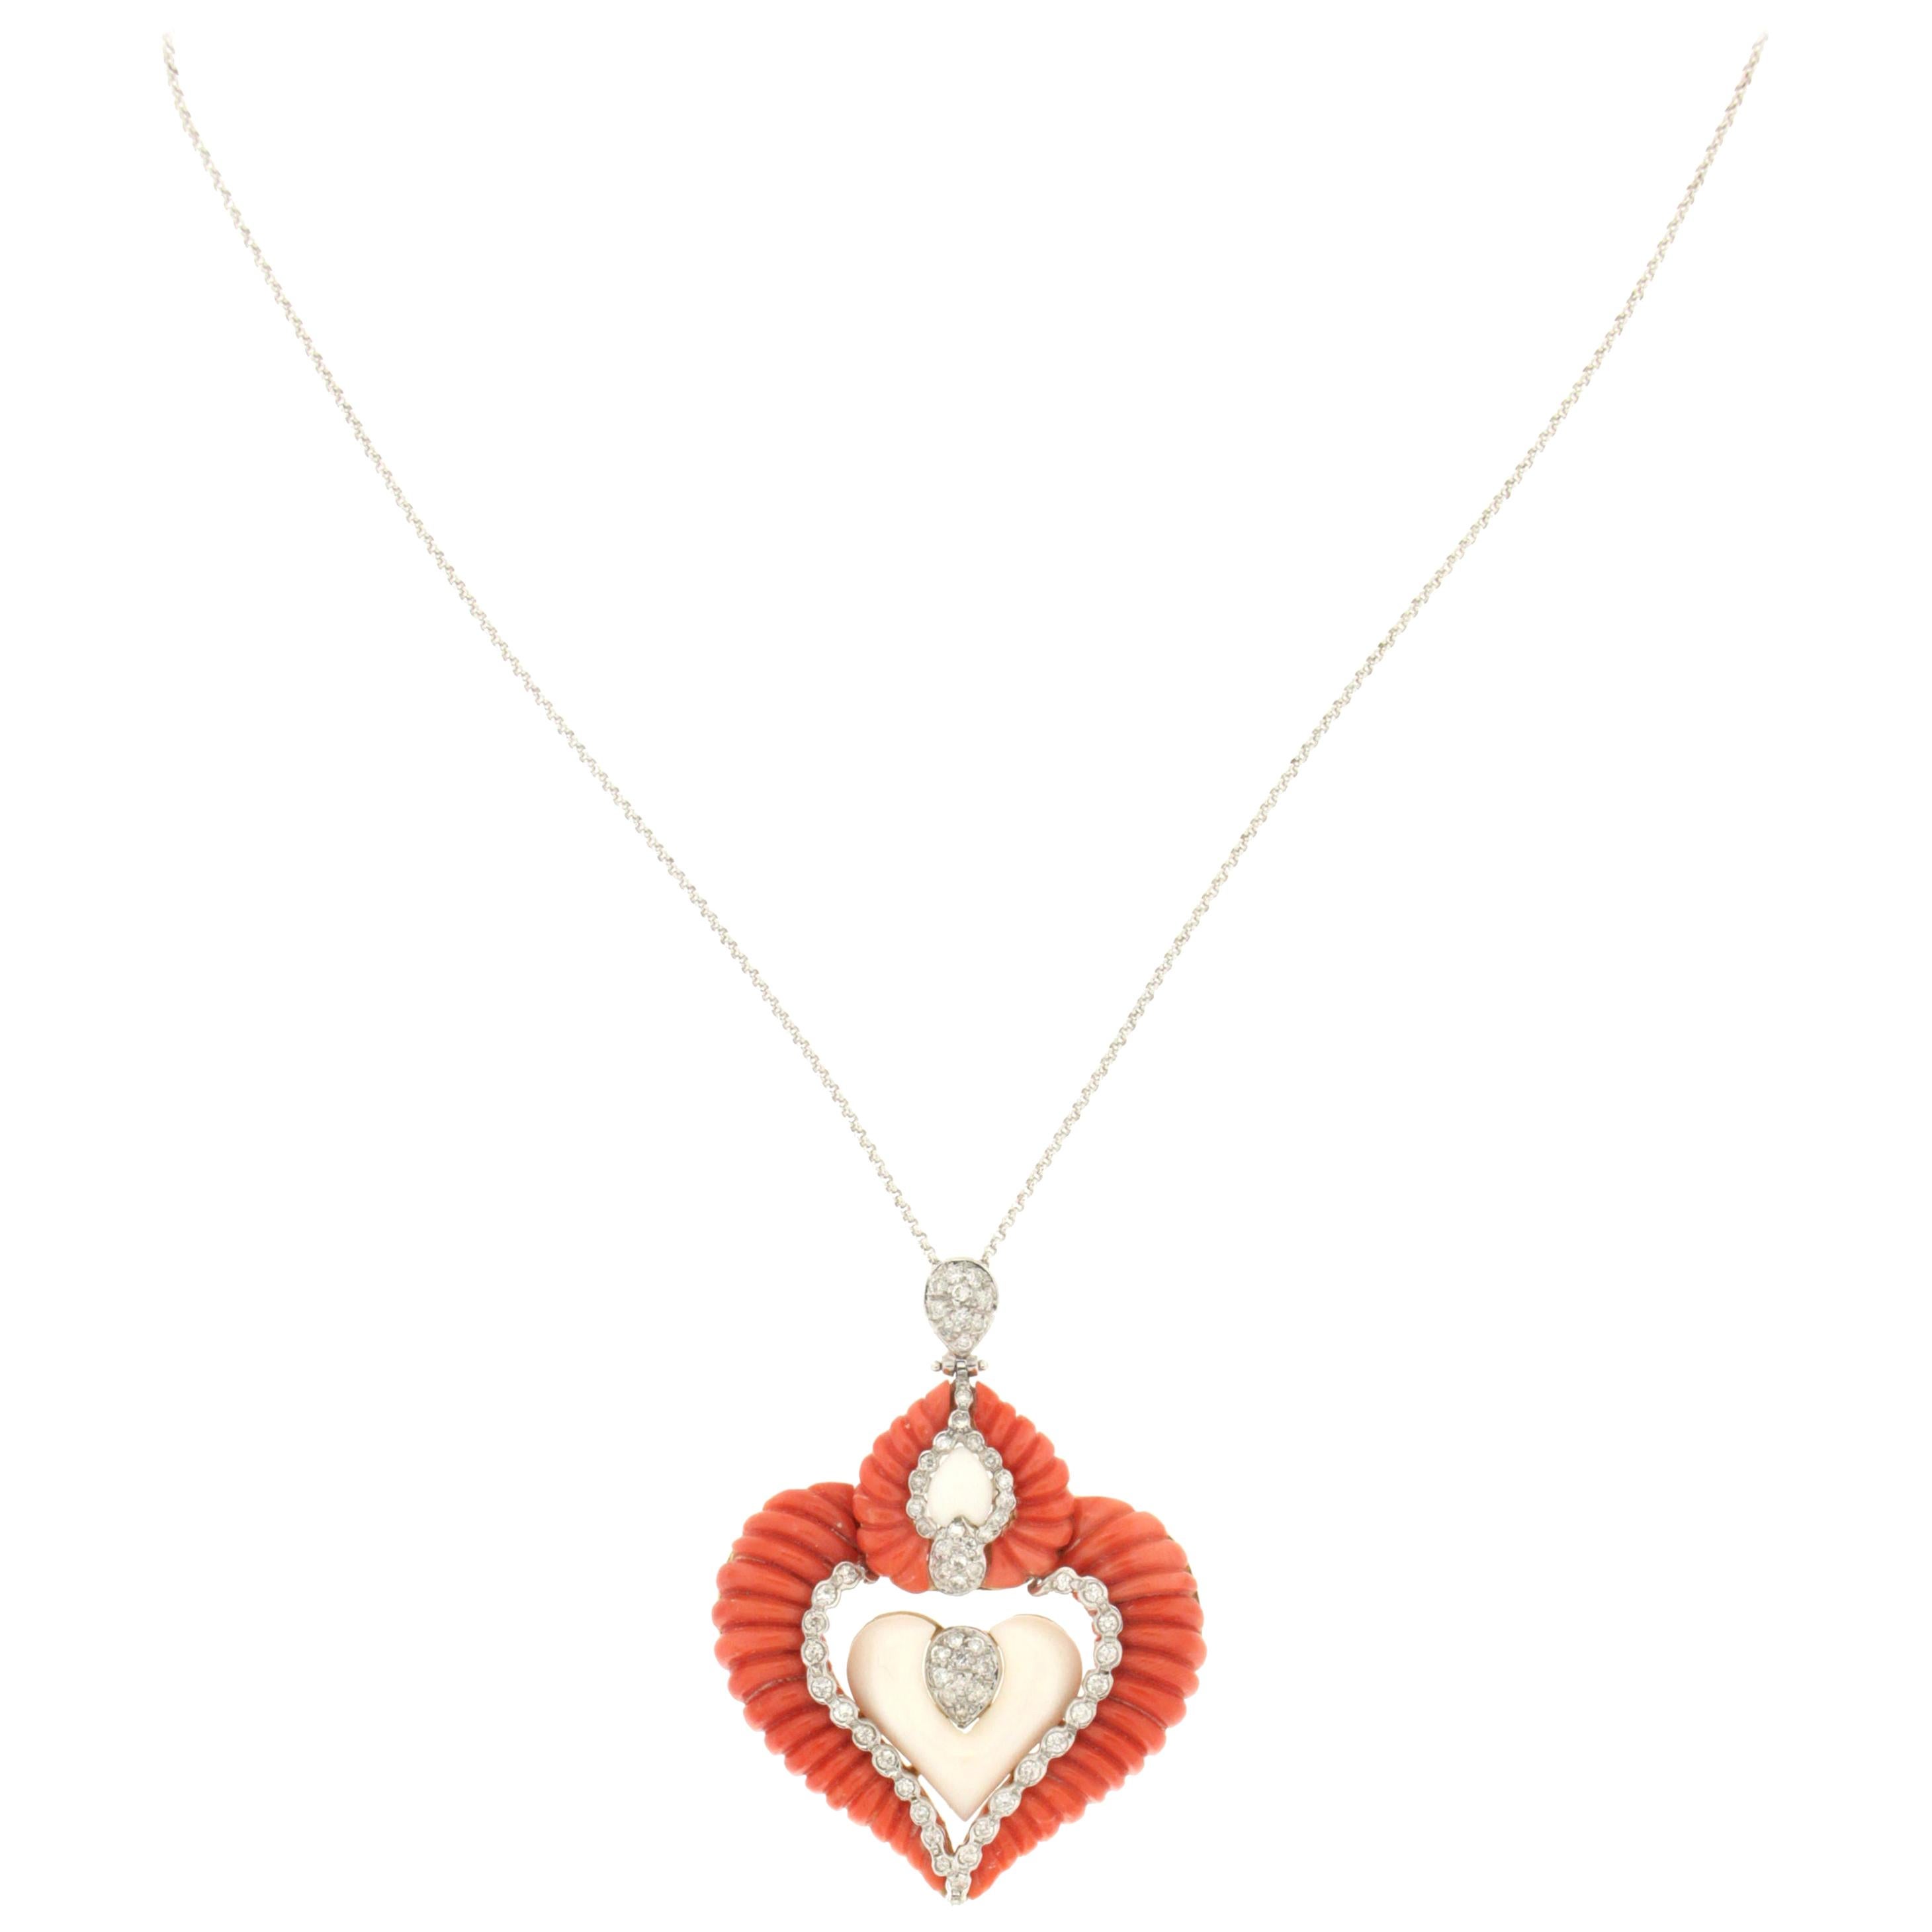 Handcraft Coral Heart 18 Karat White and Yellow Gold Diamonds Pendant Necklace